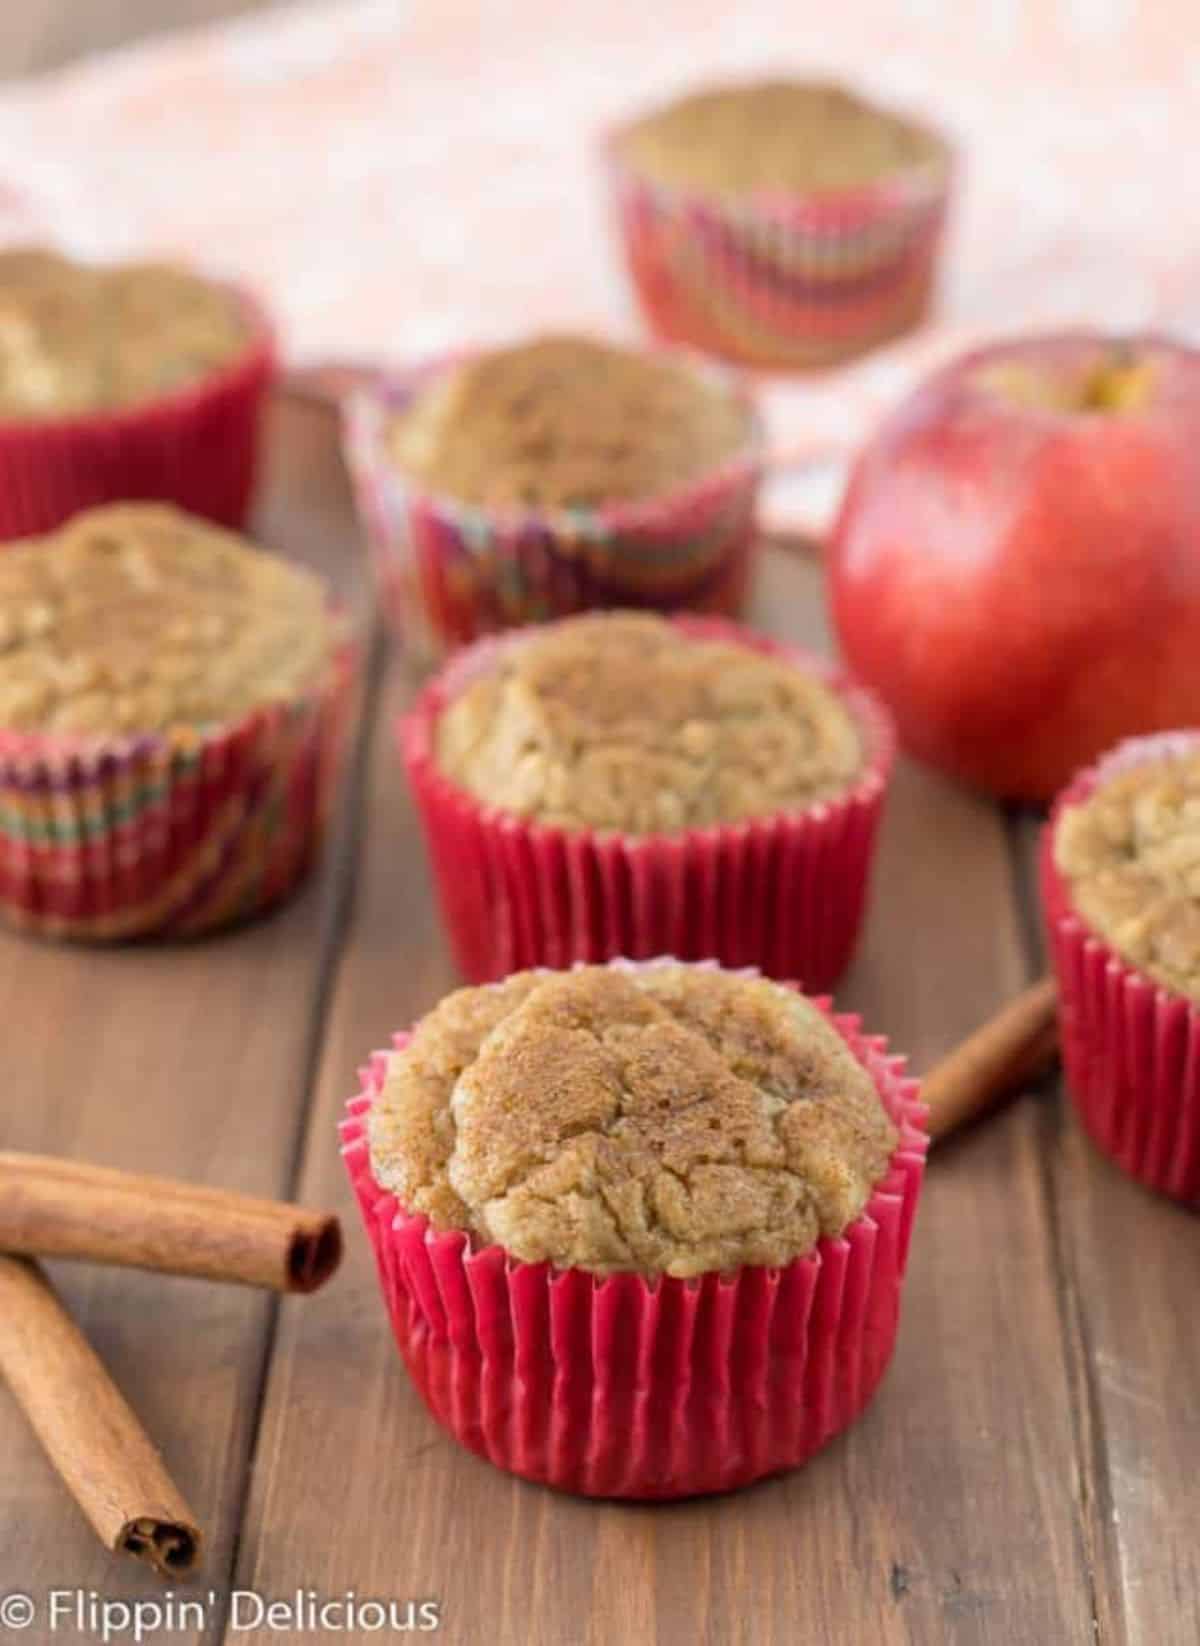 Gluten-Free Apple Muffins with cinnamon sticks on a wooden table.